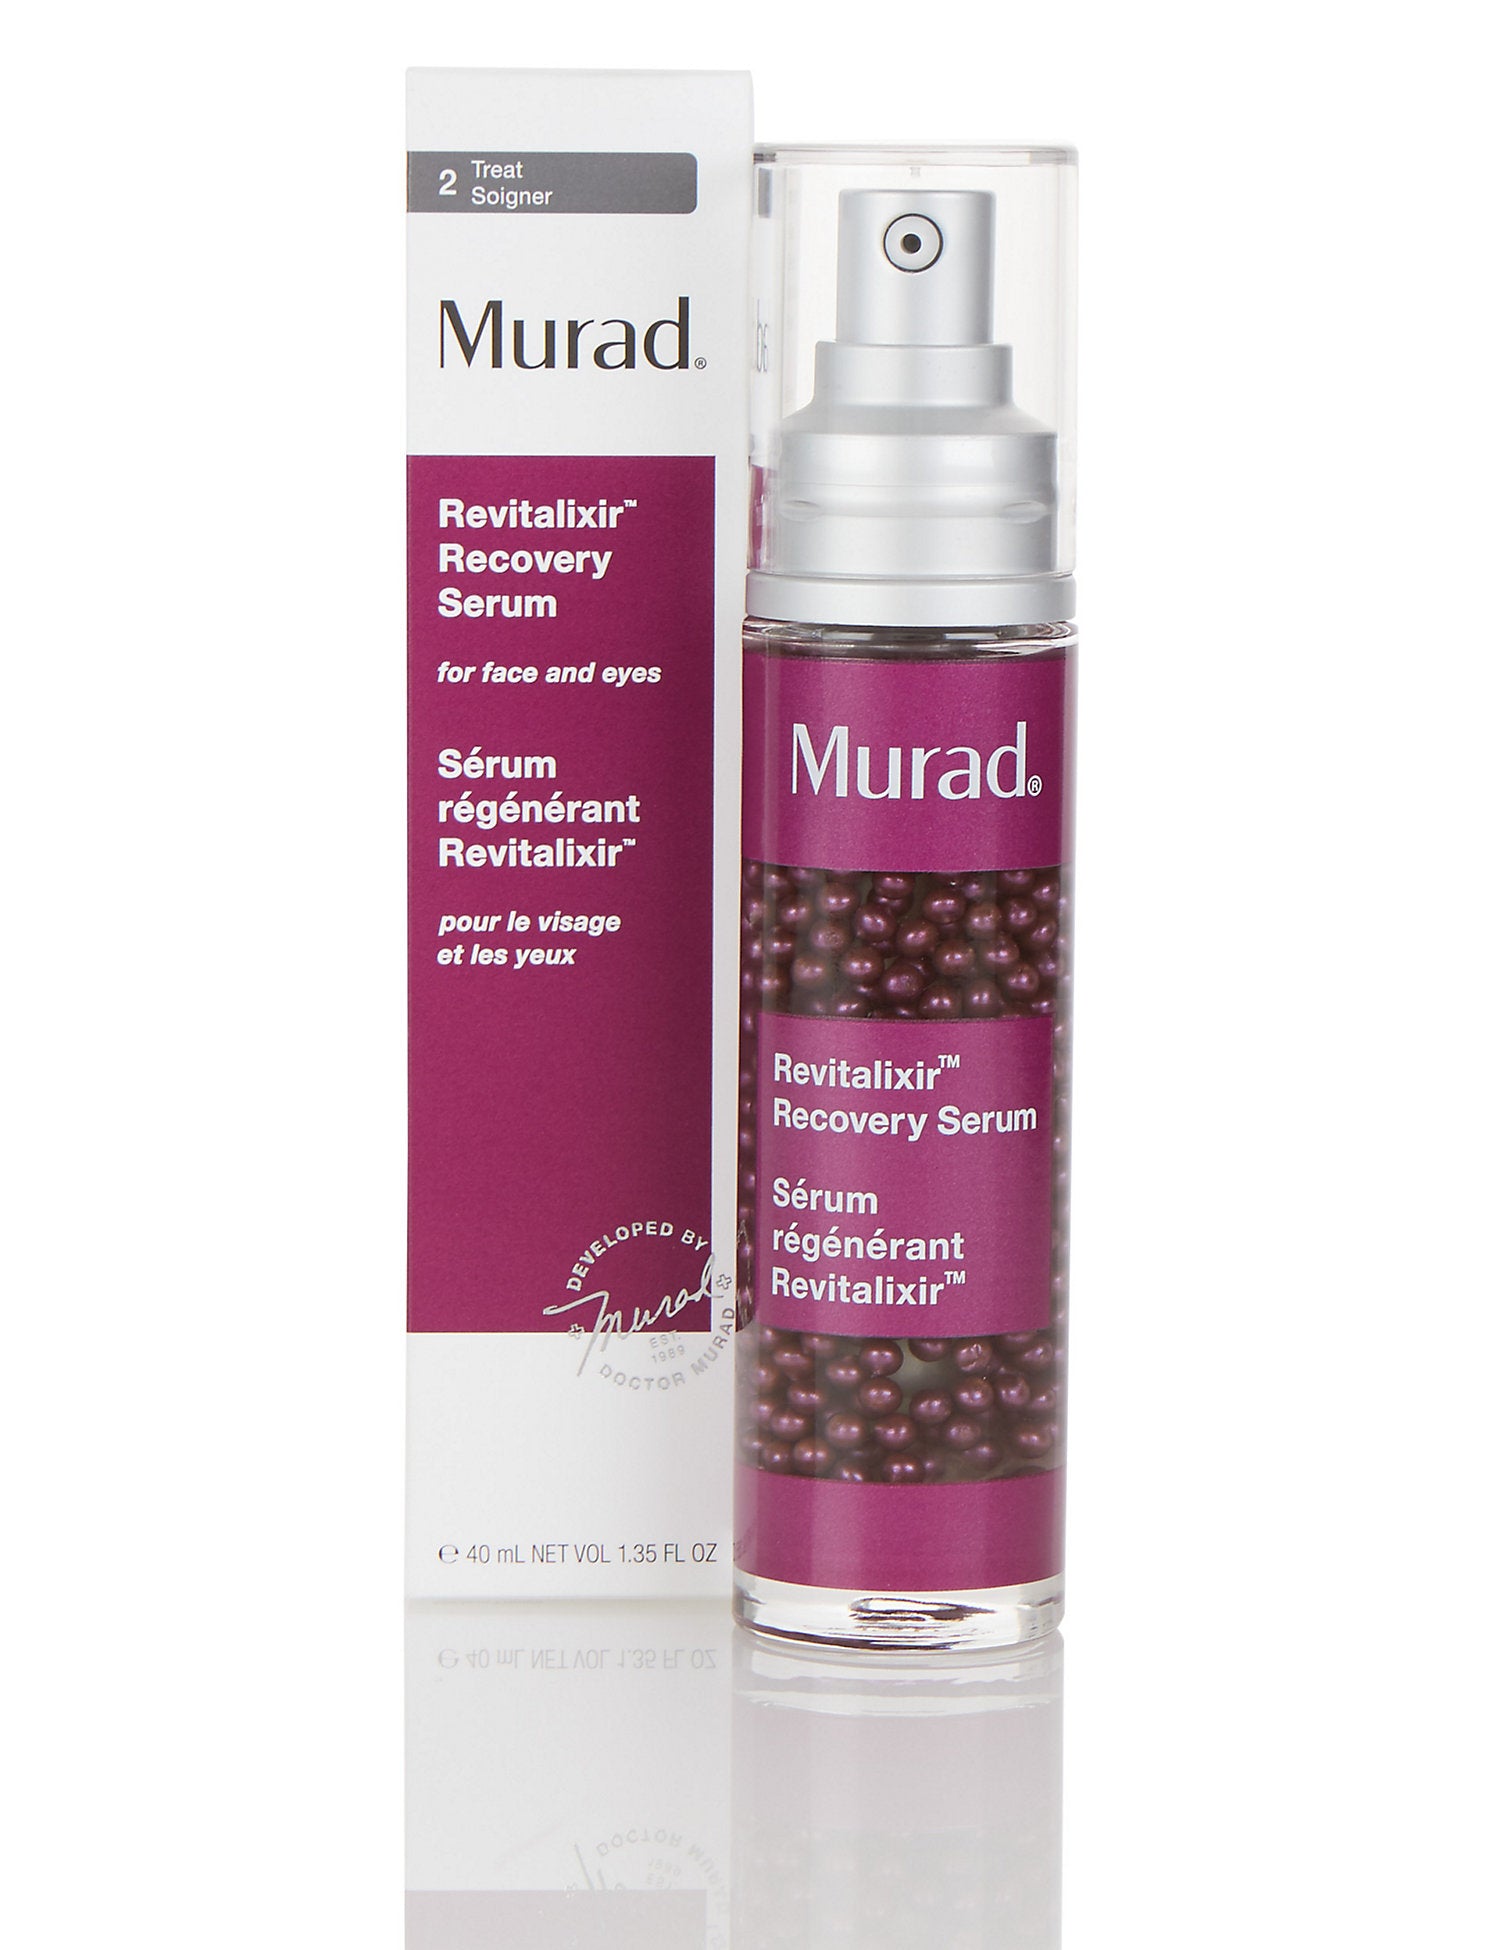 Revitalixir Recovery Serum - The Perfect Products